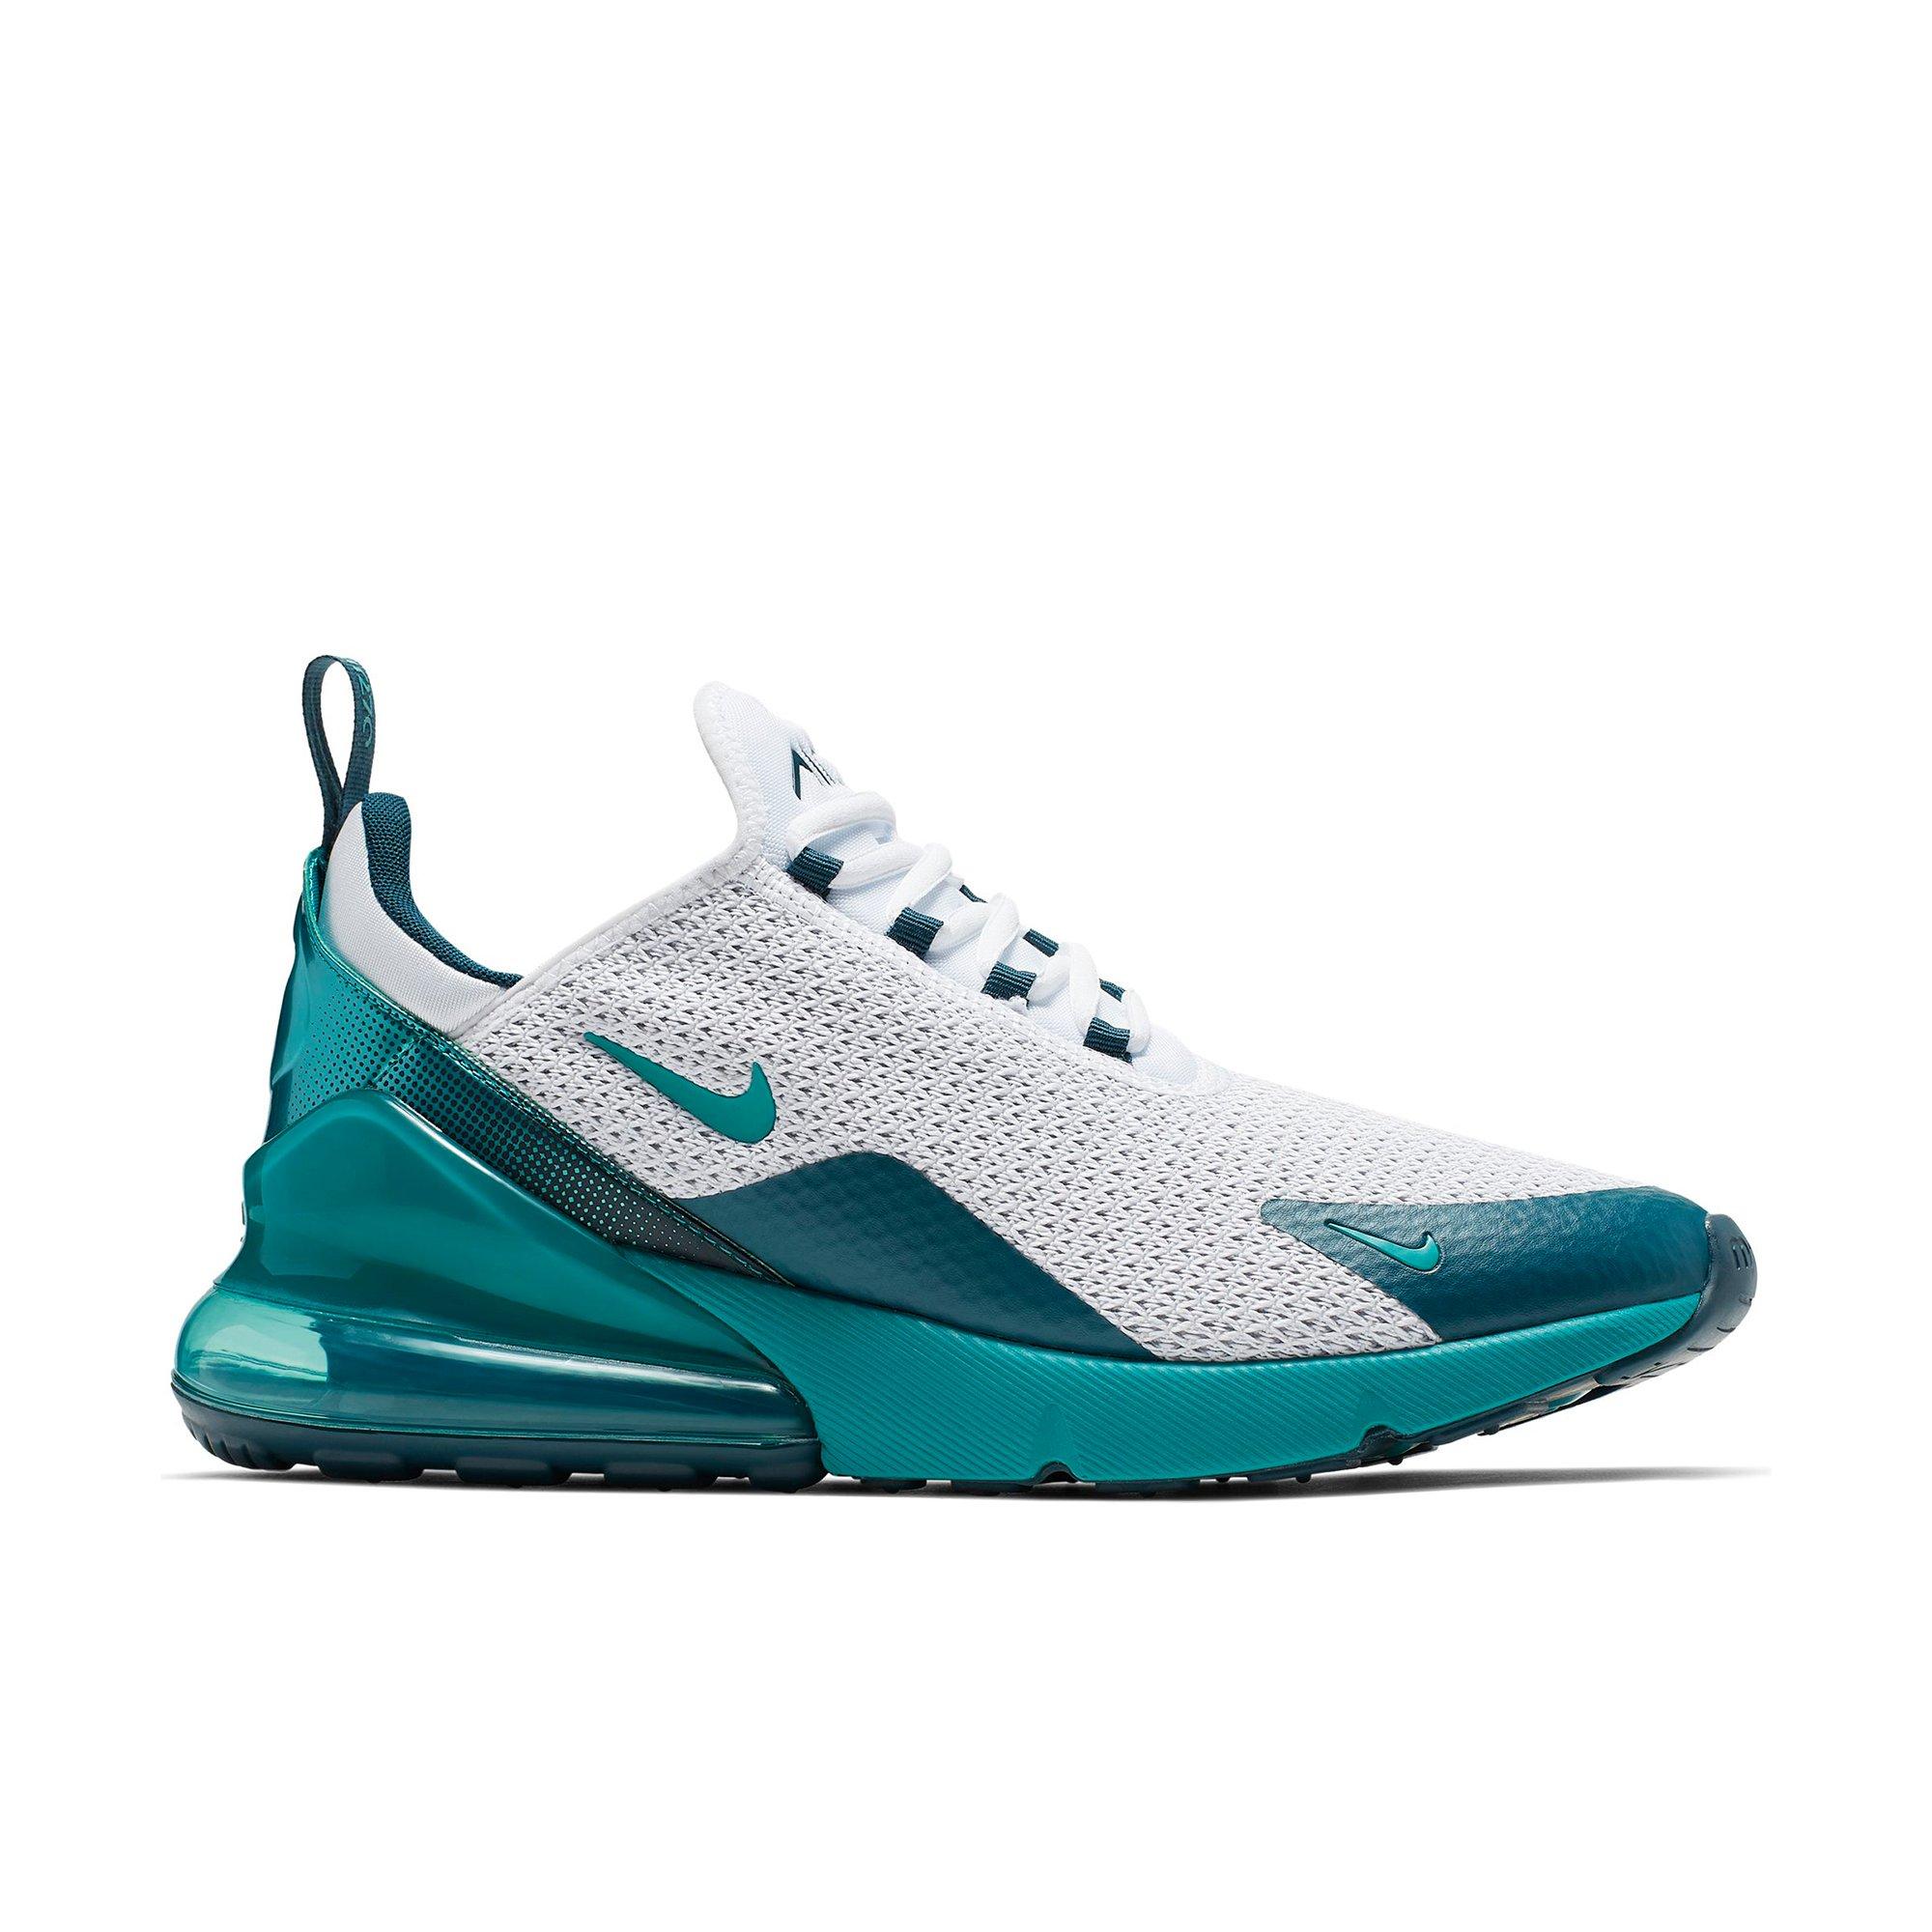 Nike Air Max 270 Teal: The Bold and Eye-Catching Sneaker for a Pop of Color